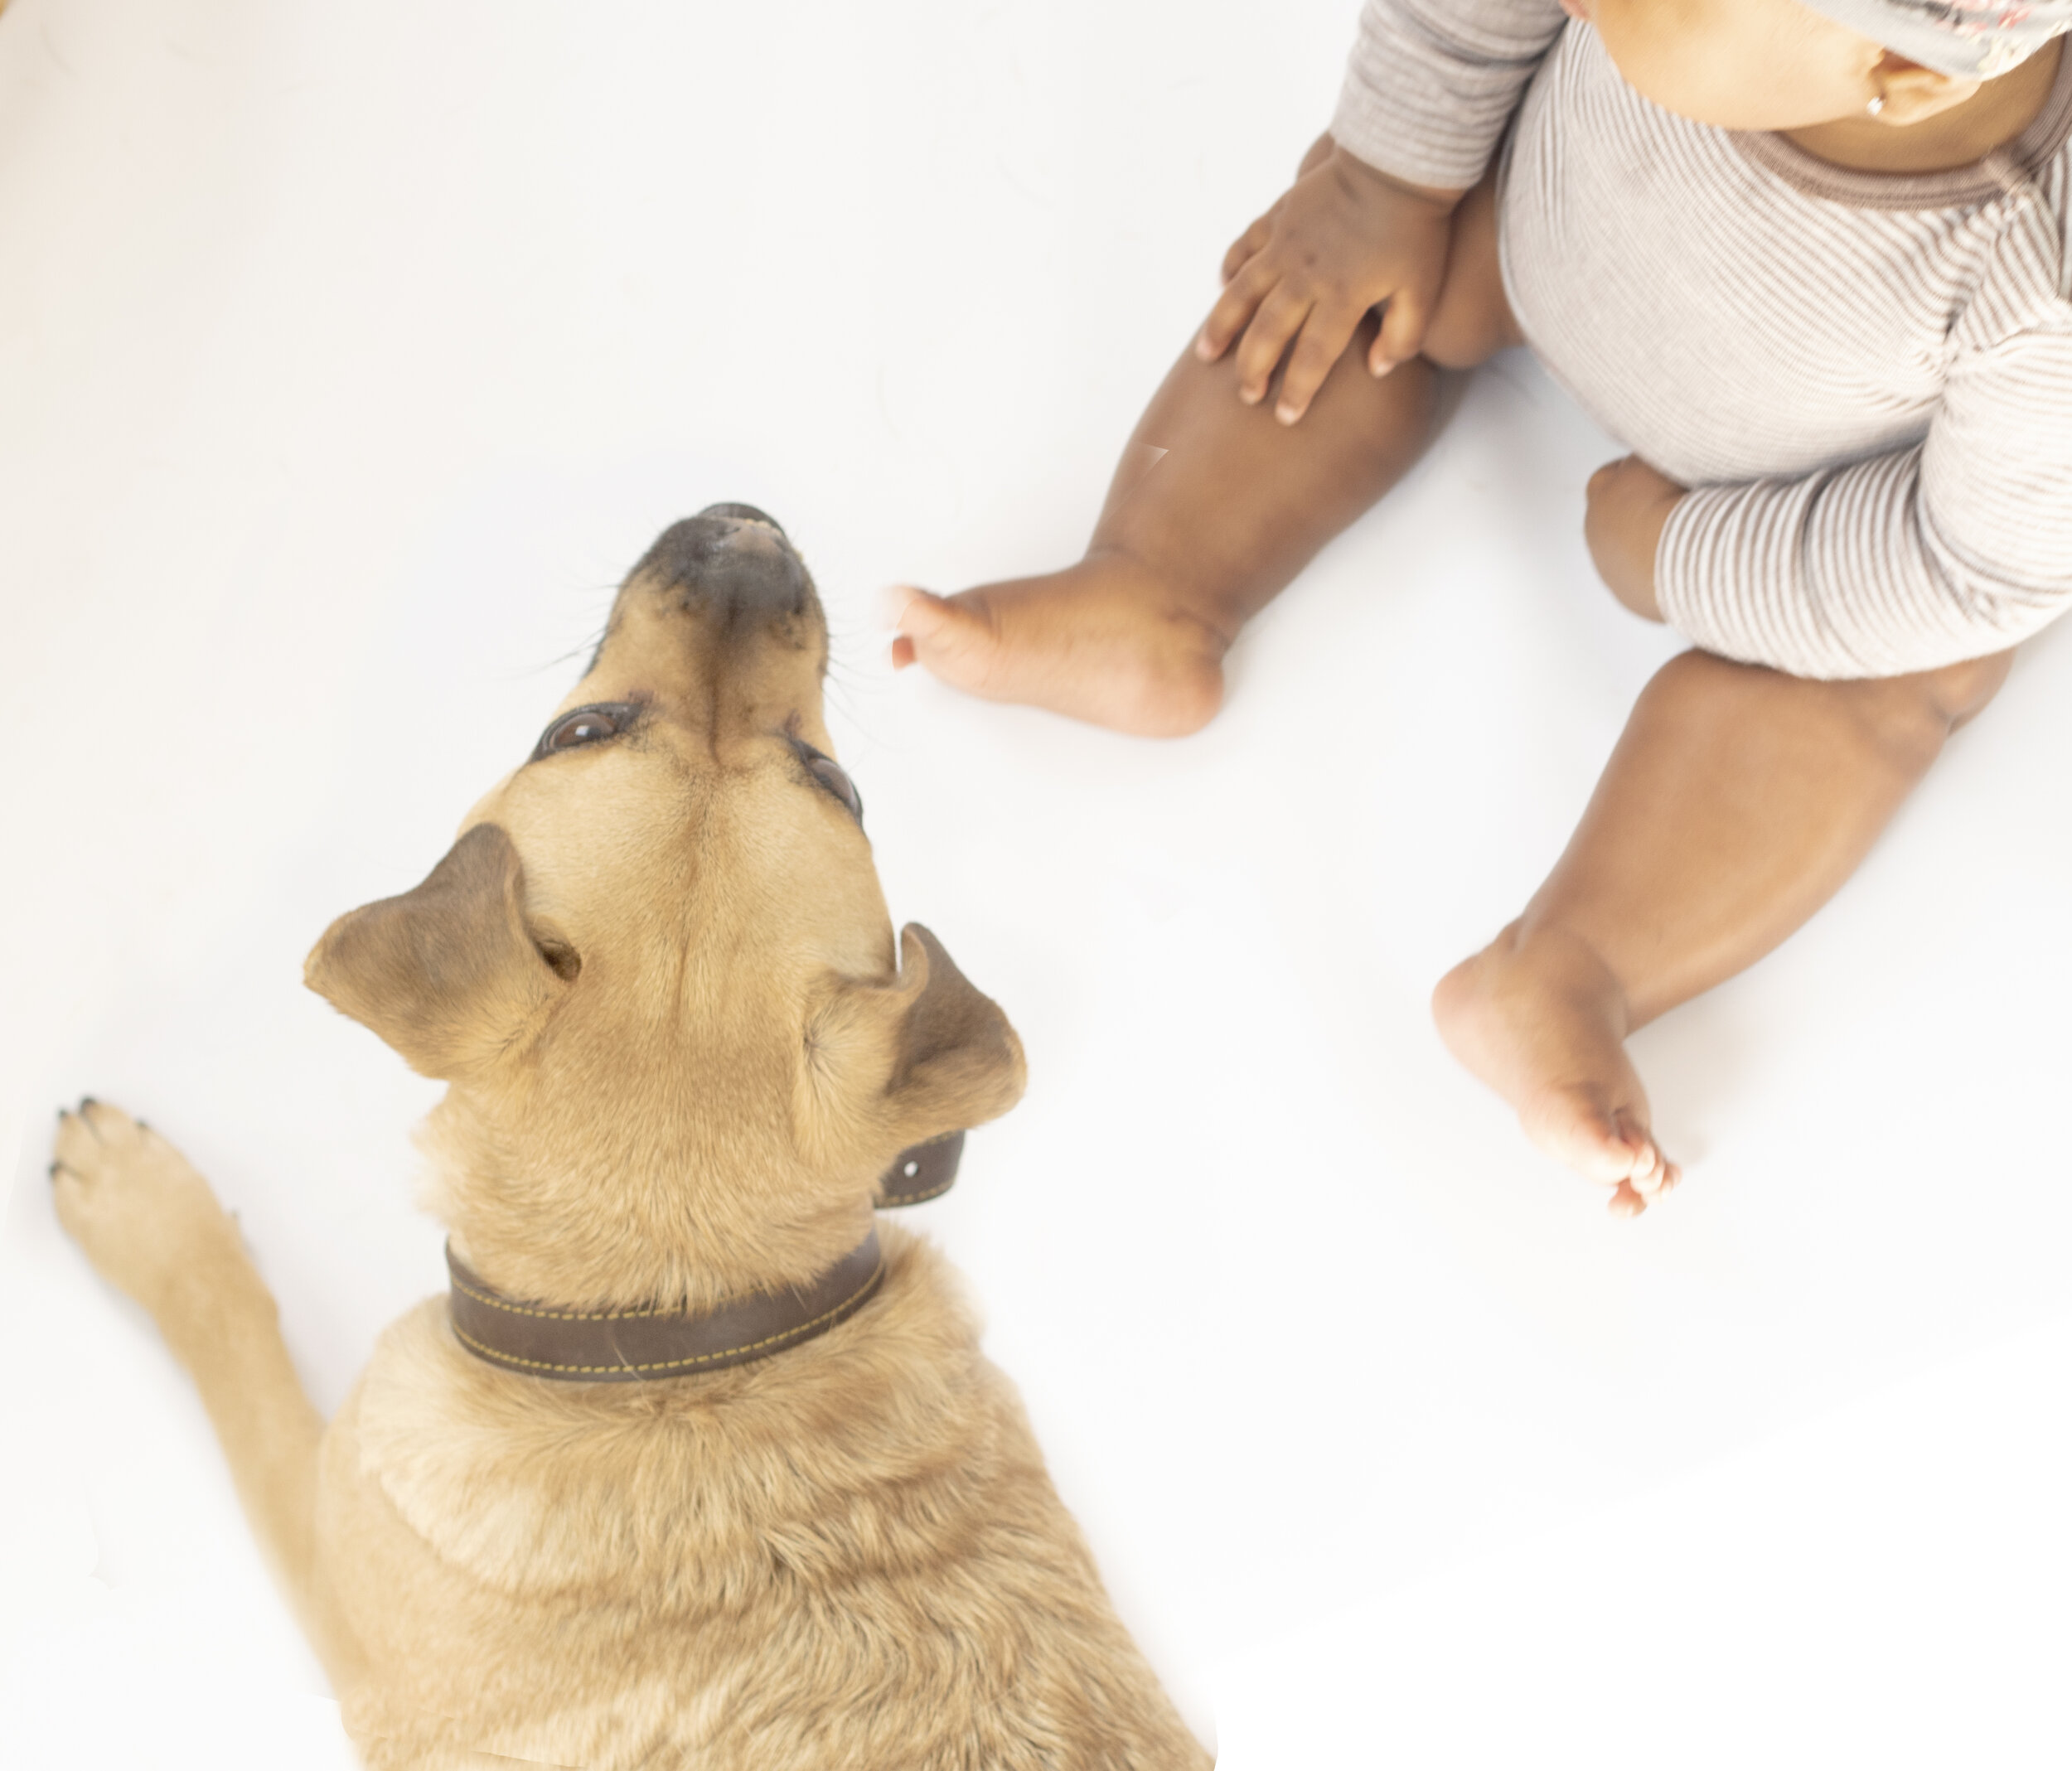 Are you introducing the dog to your baby or the baby to your dog?